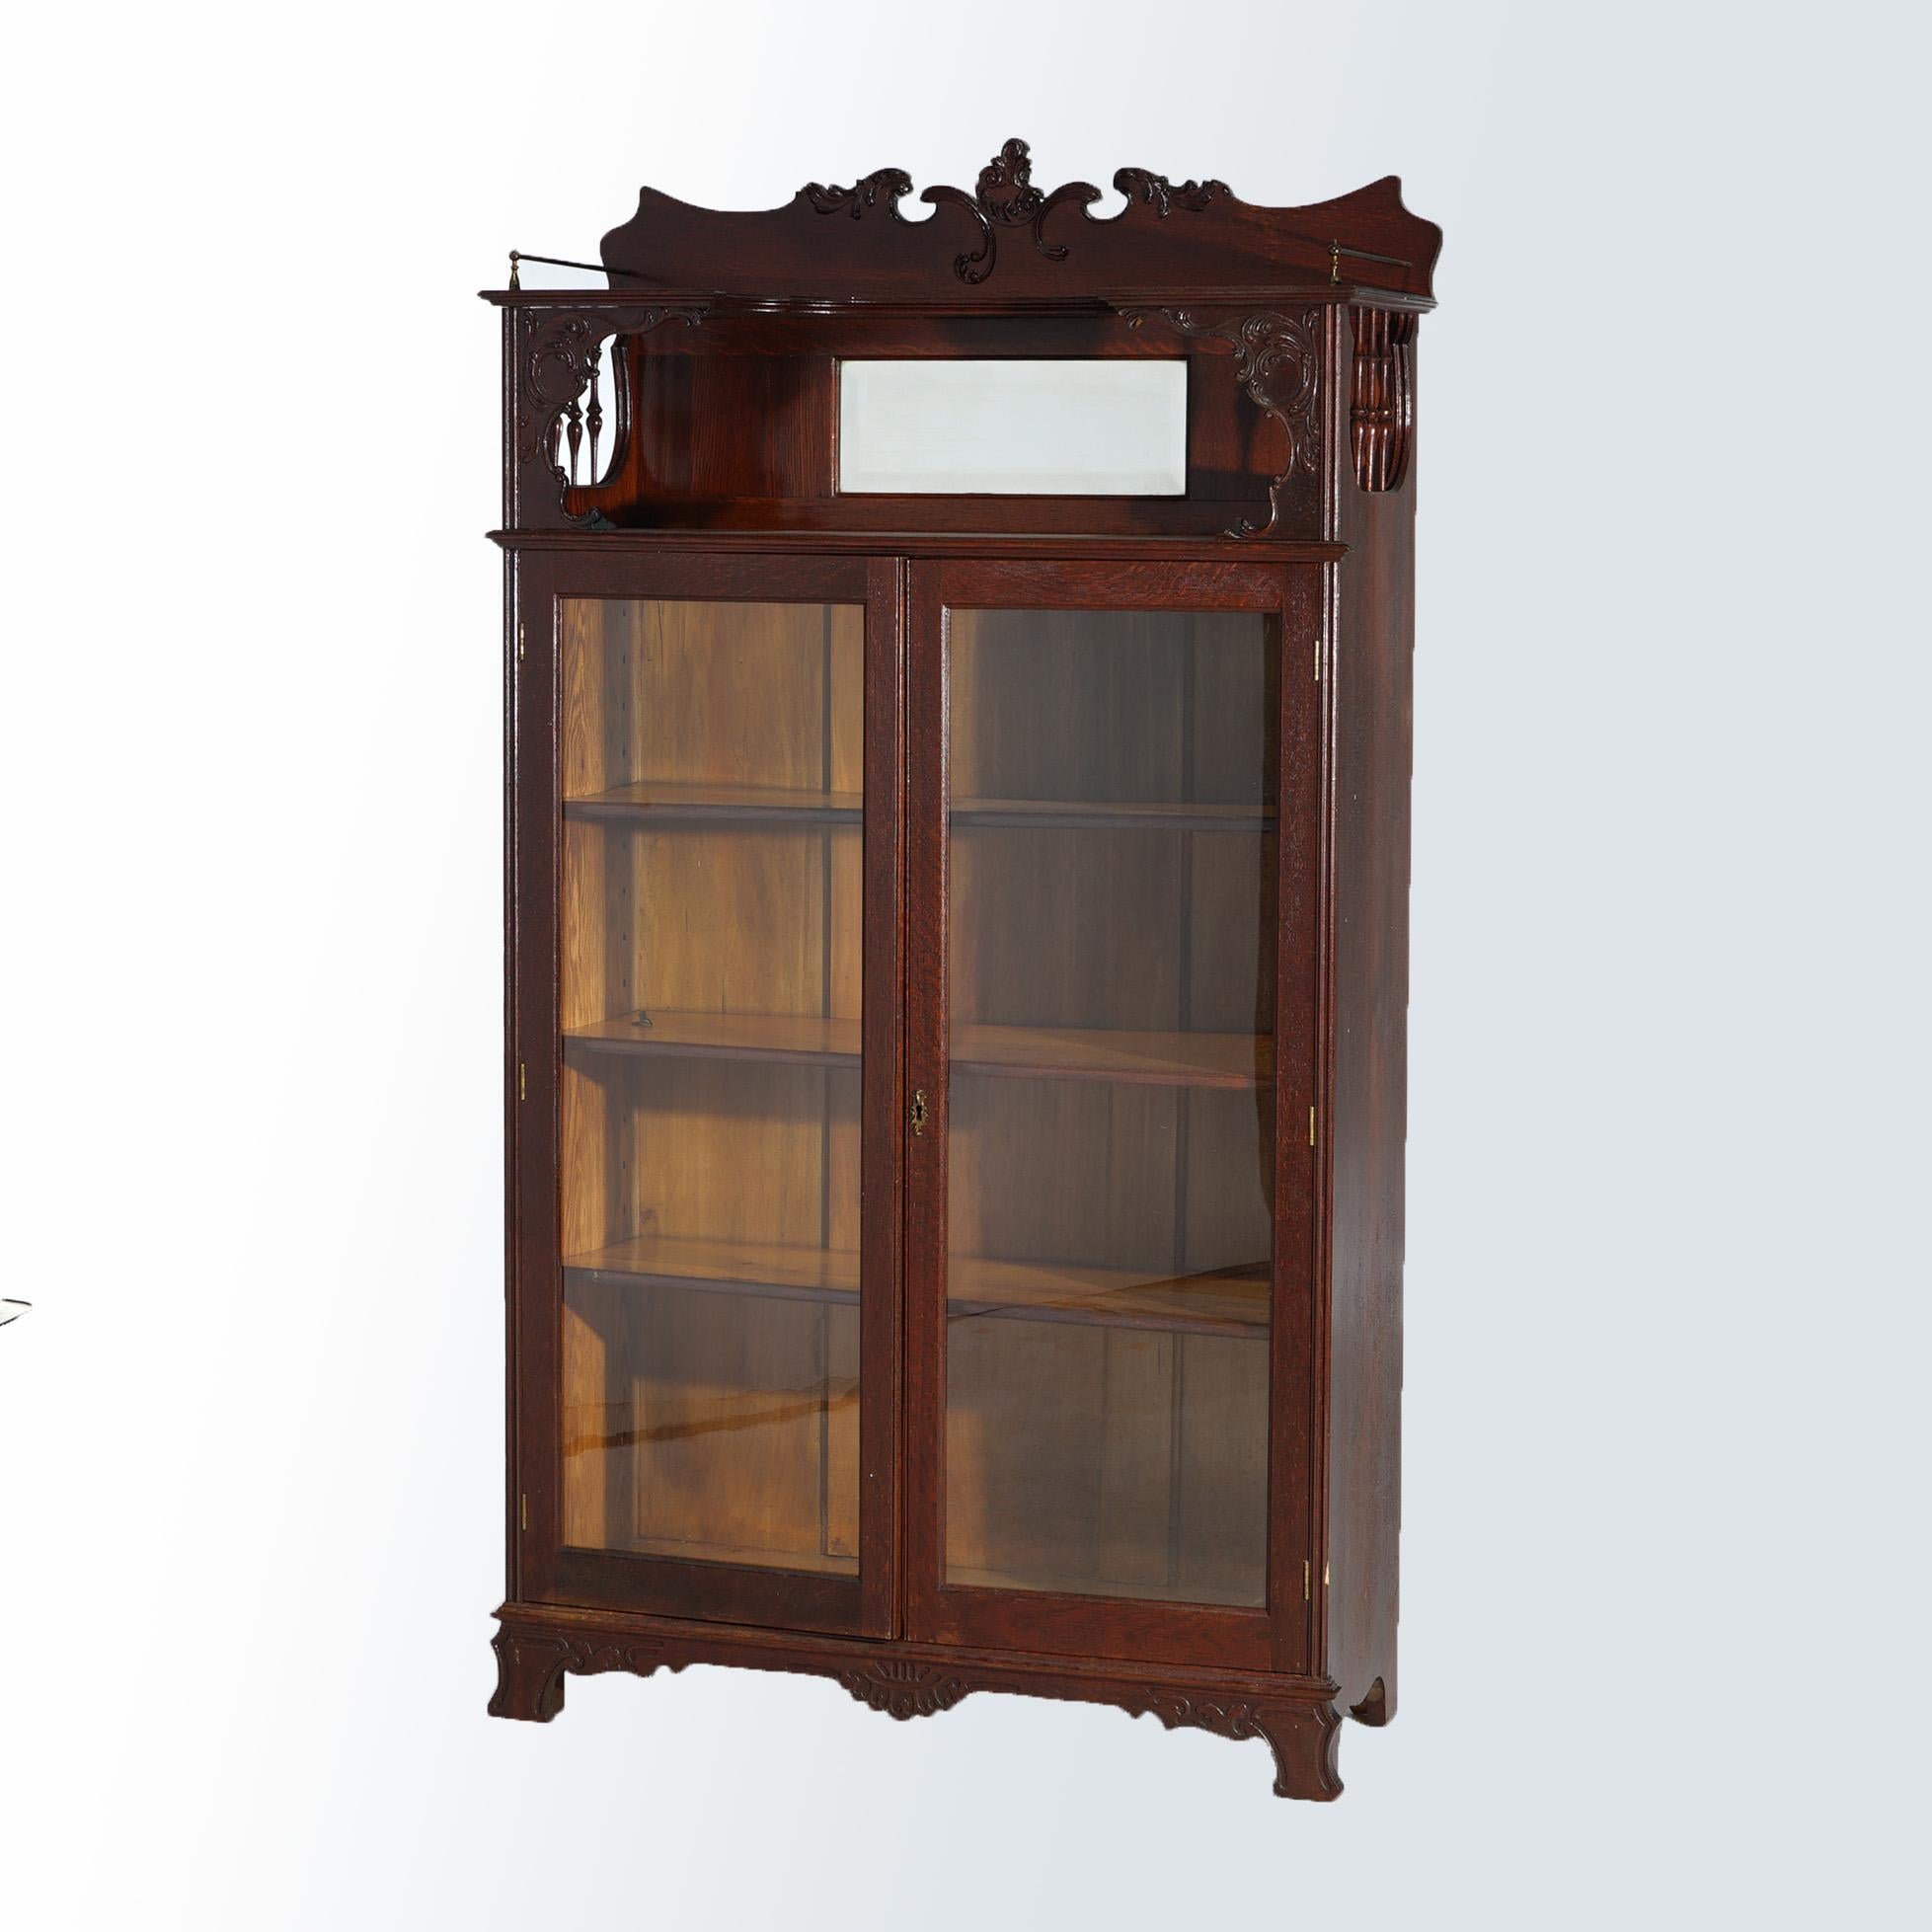 ***Ask About Lower In-House Shipping Rates - Reliable Service & Fully Insured***
An antique bookcase in the manner of RJ Horner offers oak construction with mirrored crest having scrolled frame, spindle supports and surmounting double glass doors